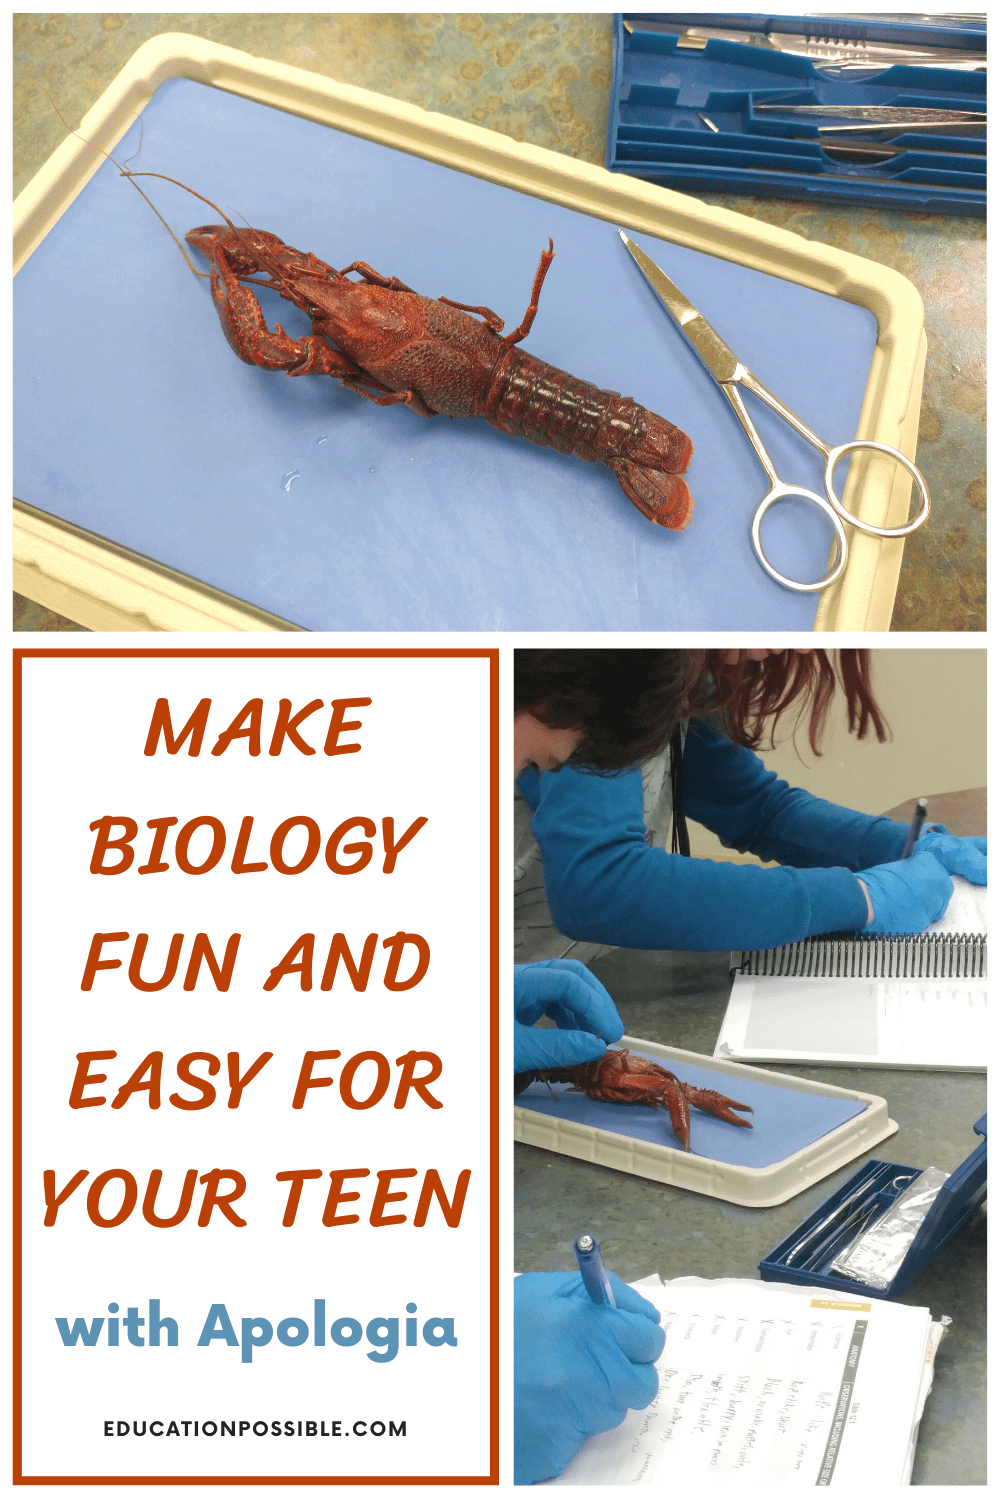 Make Biology Fun and Easy for Your Teen with Apologia